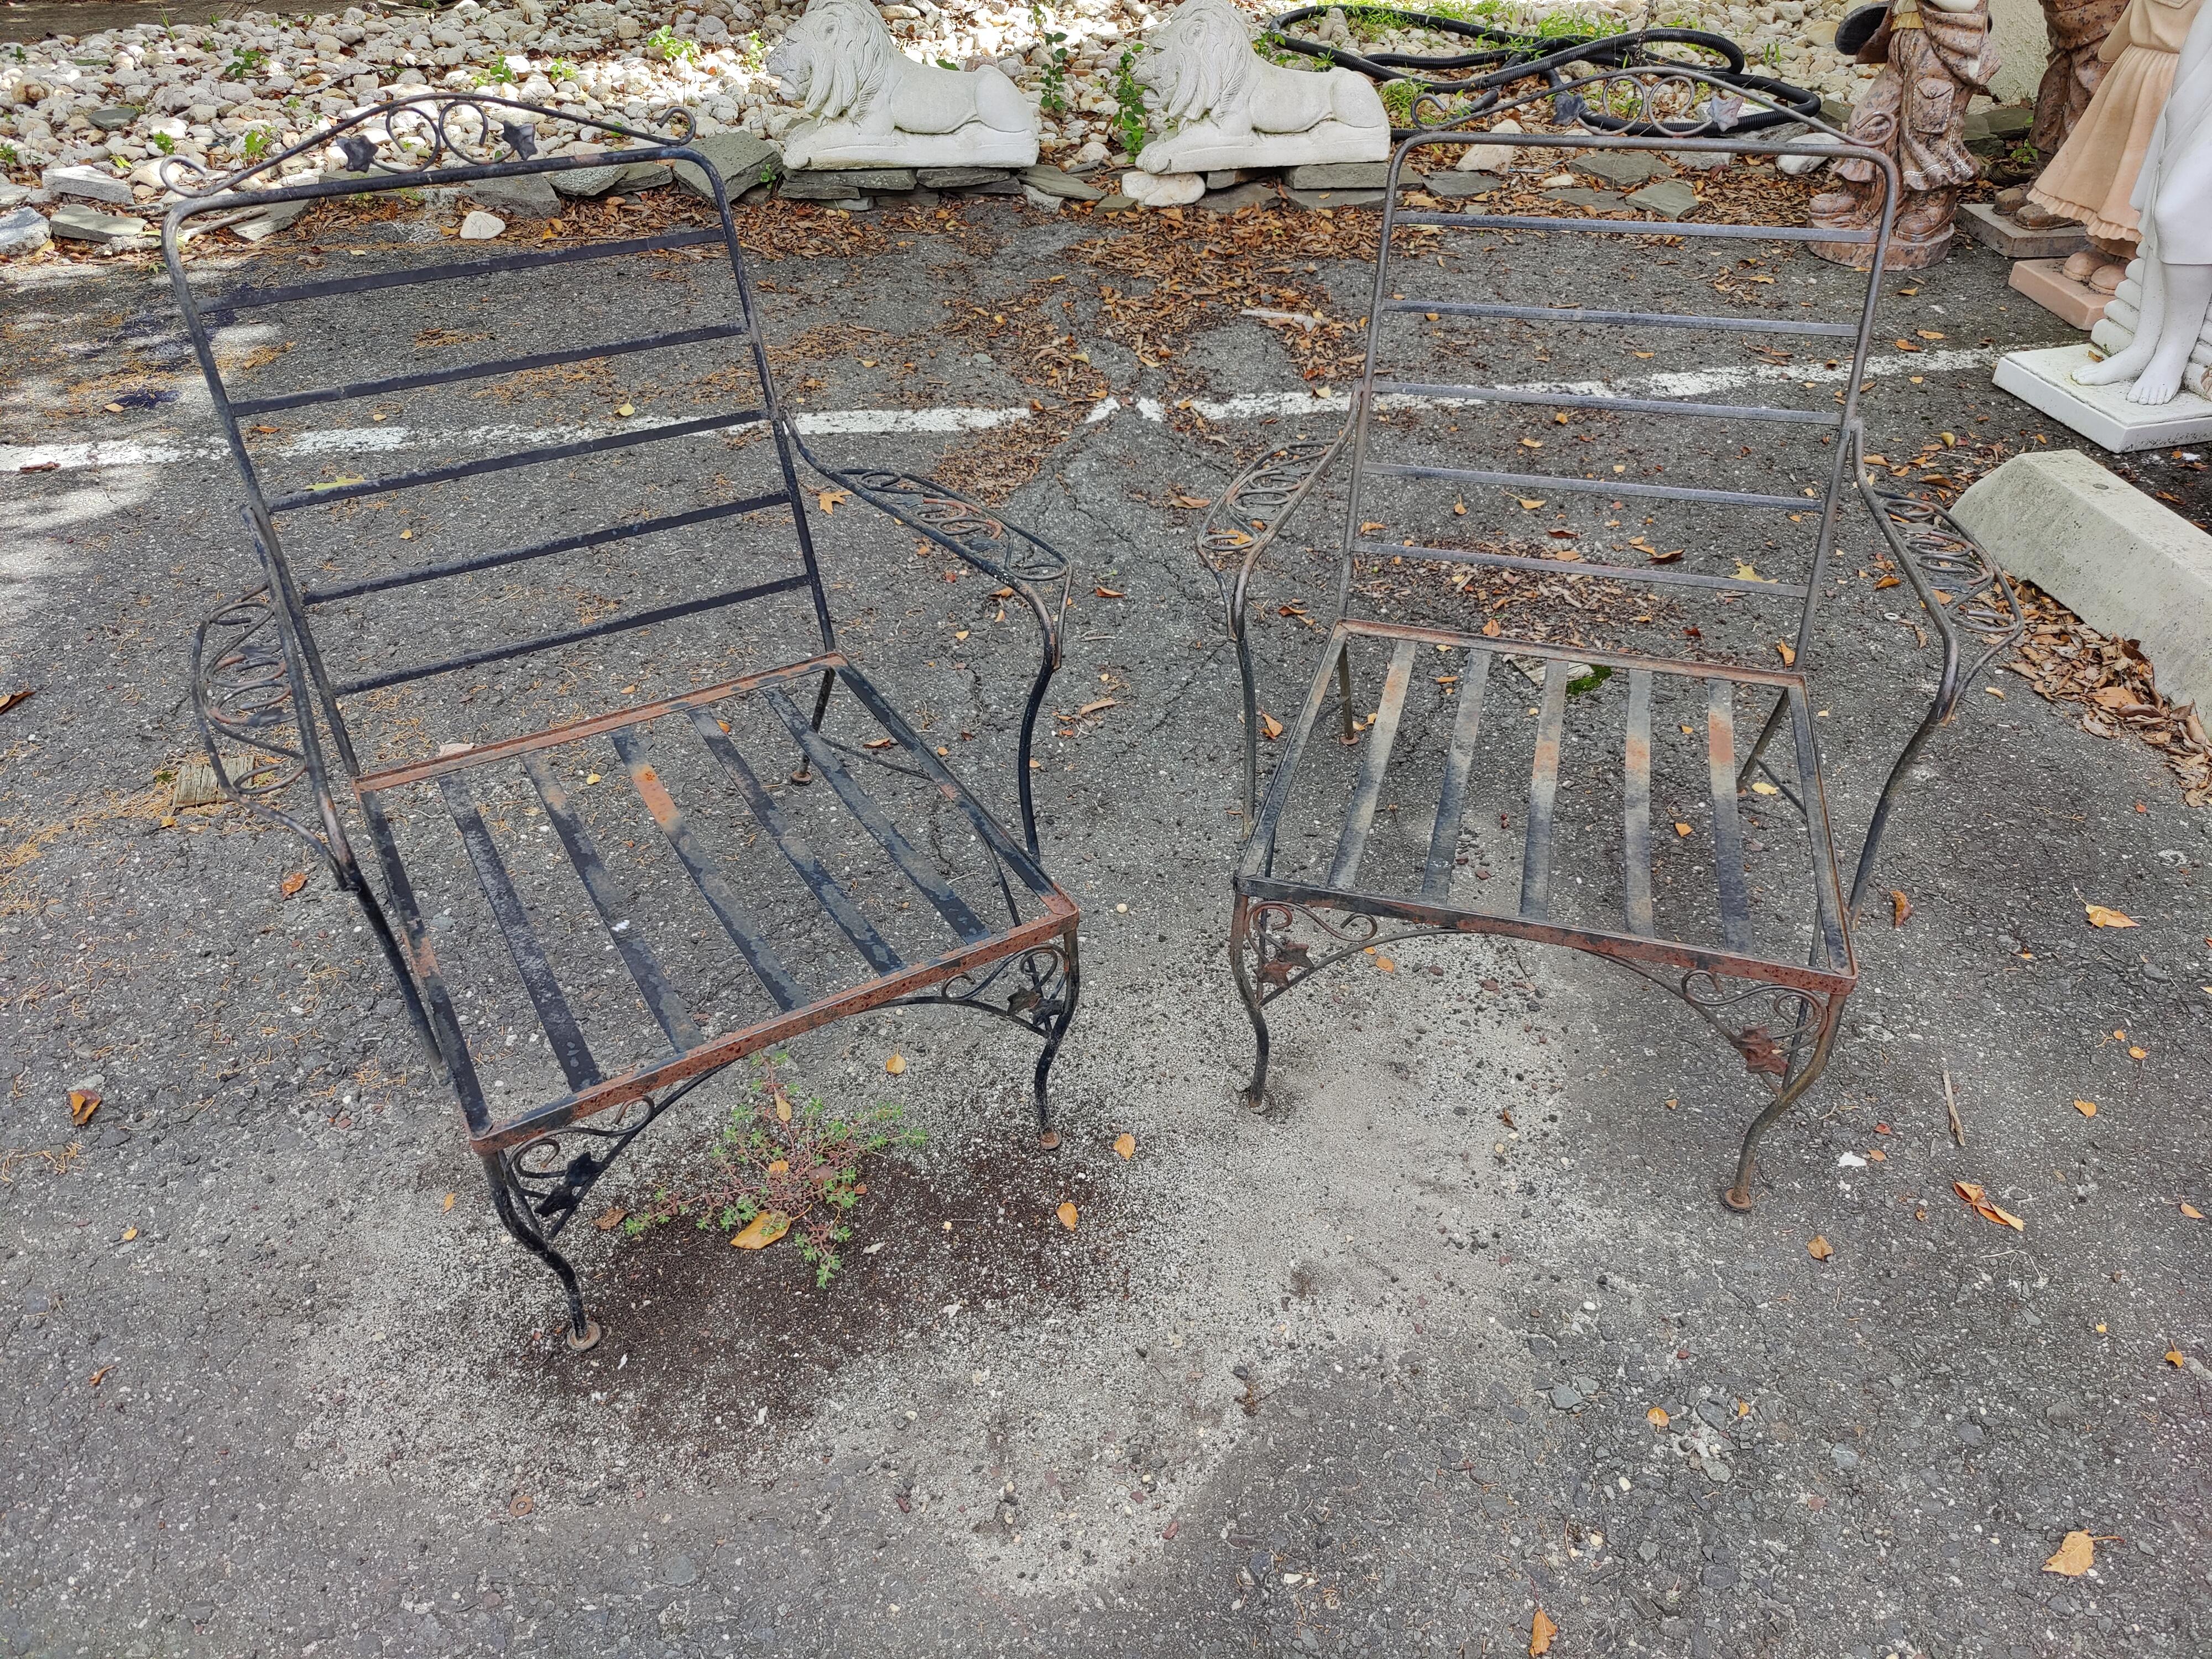 A pair of Mid-Century Modern outdoor lounge chairs. Made out of sturdy wrought iron. These lounge chairs feature elegant scrollwork and floral designs Perfect for any patio, pool, balcony setting. 
(Please confirm item location - NY or NJ - with